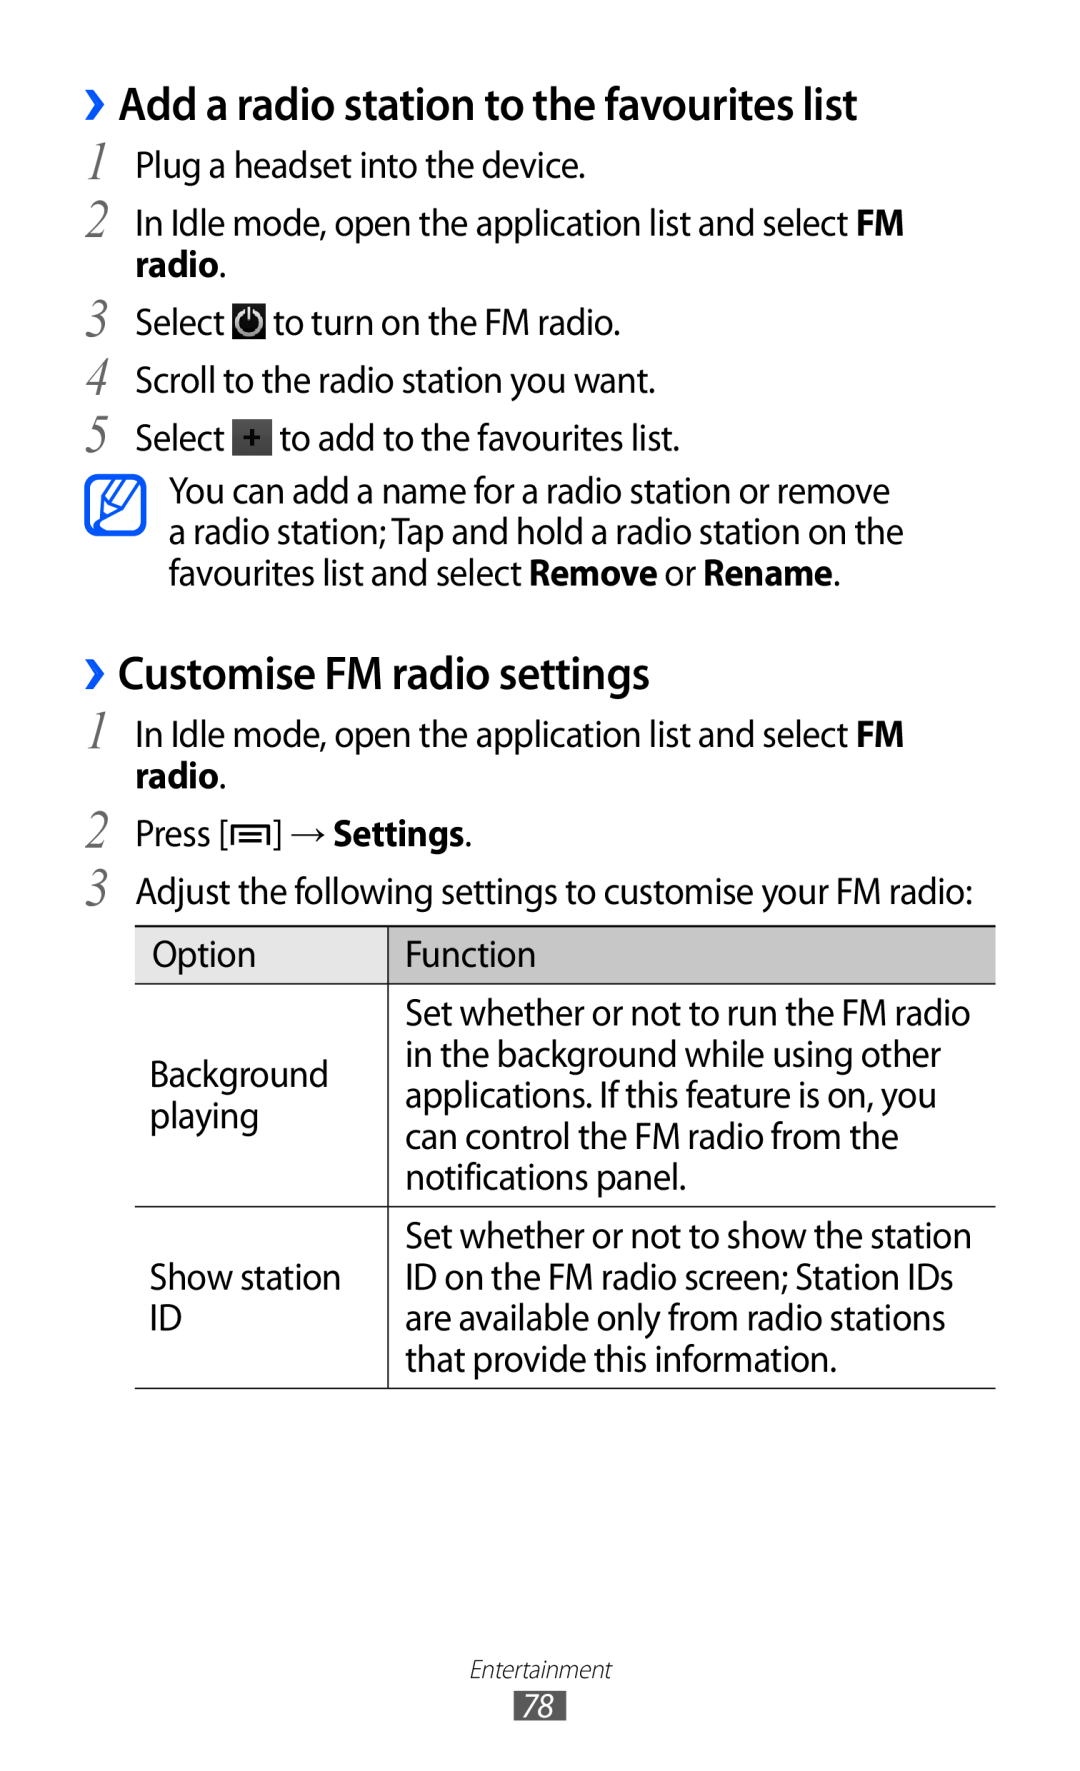 Samsung GT-I9070MSEXSG, GT-I9070RWAJED manual ››Add a radio station to the favourites list, ››Customise FM radio settings 